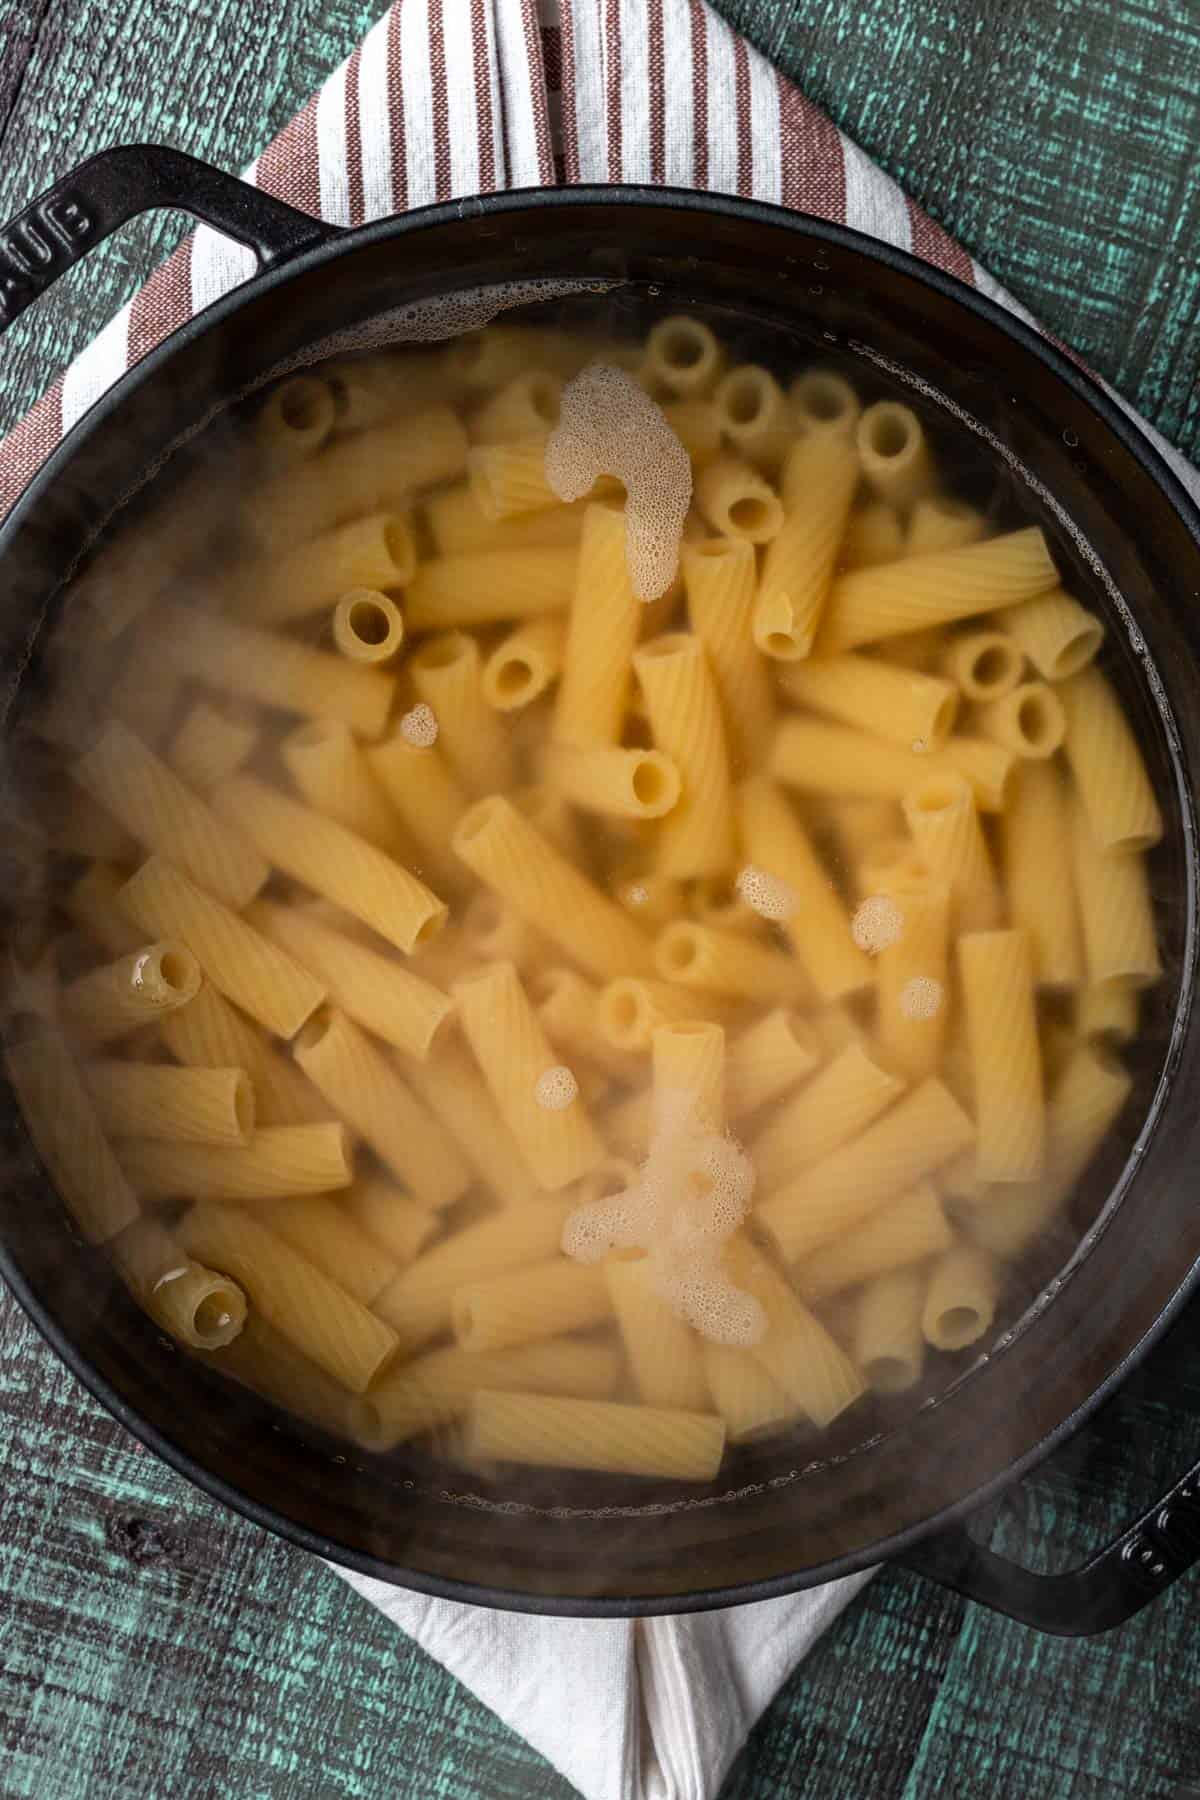 Pasta cooking in boiling salted water.